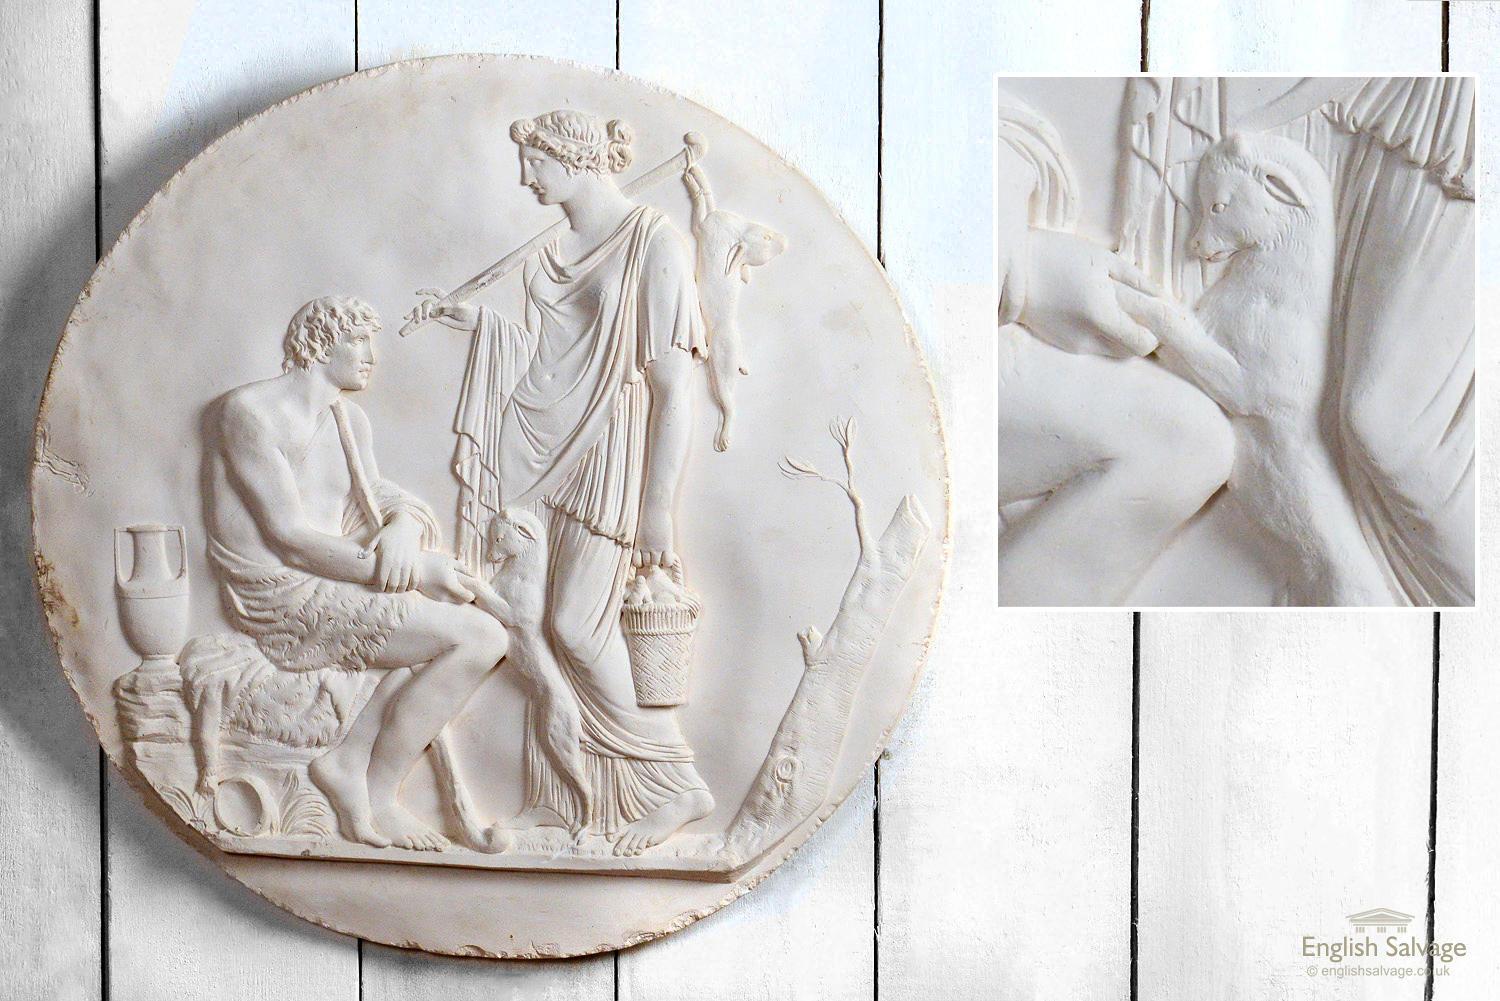 Impressive antique chalk relief moulds depicting Classical Greek pastoral scenes. One shows a Greek couple milking a goat, another a mother teaching a child to play a trumpet, and the third a scene with a huntress and her companion with a dog. There